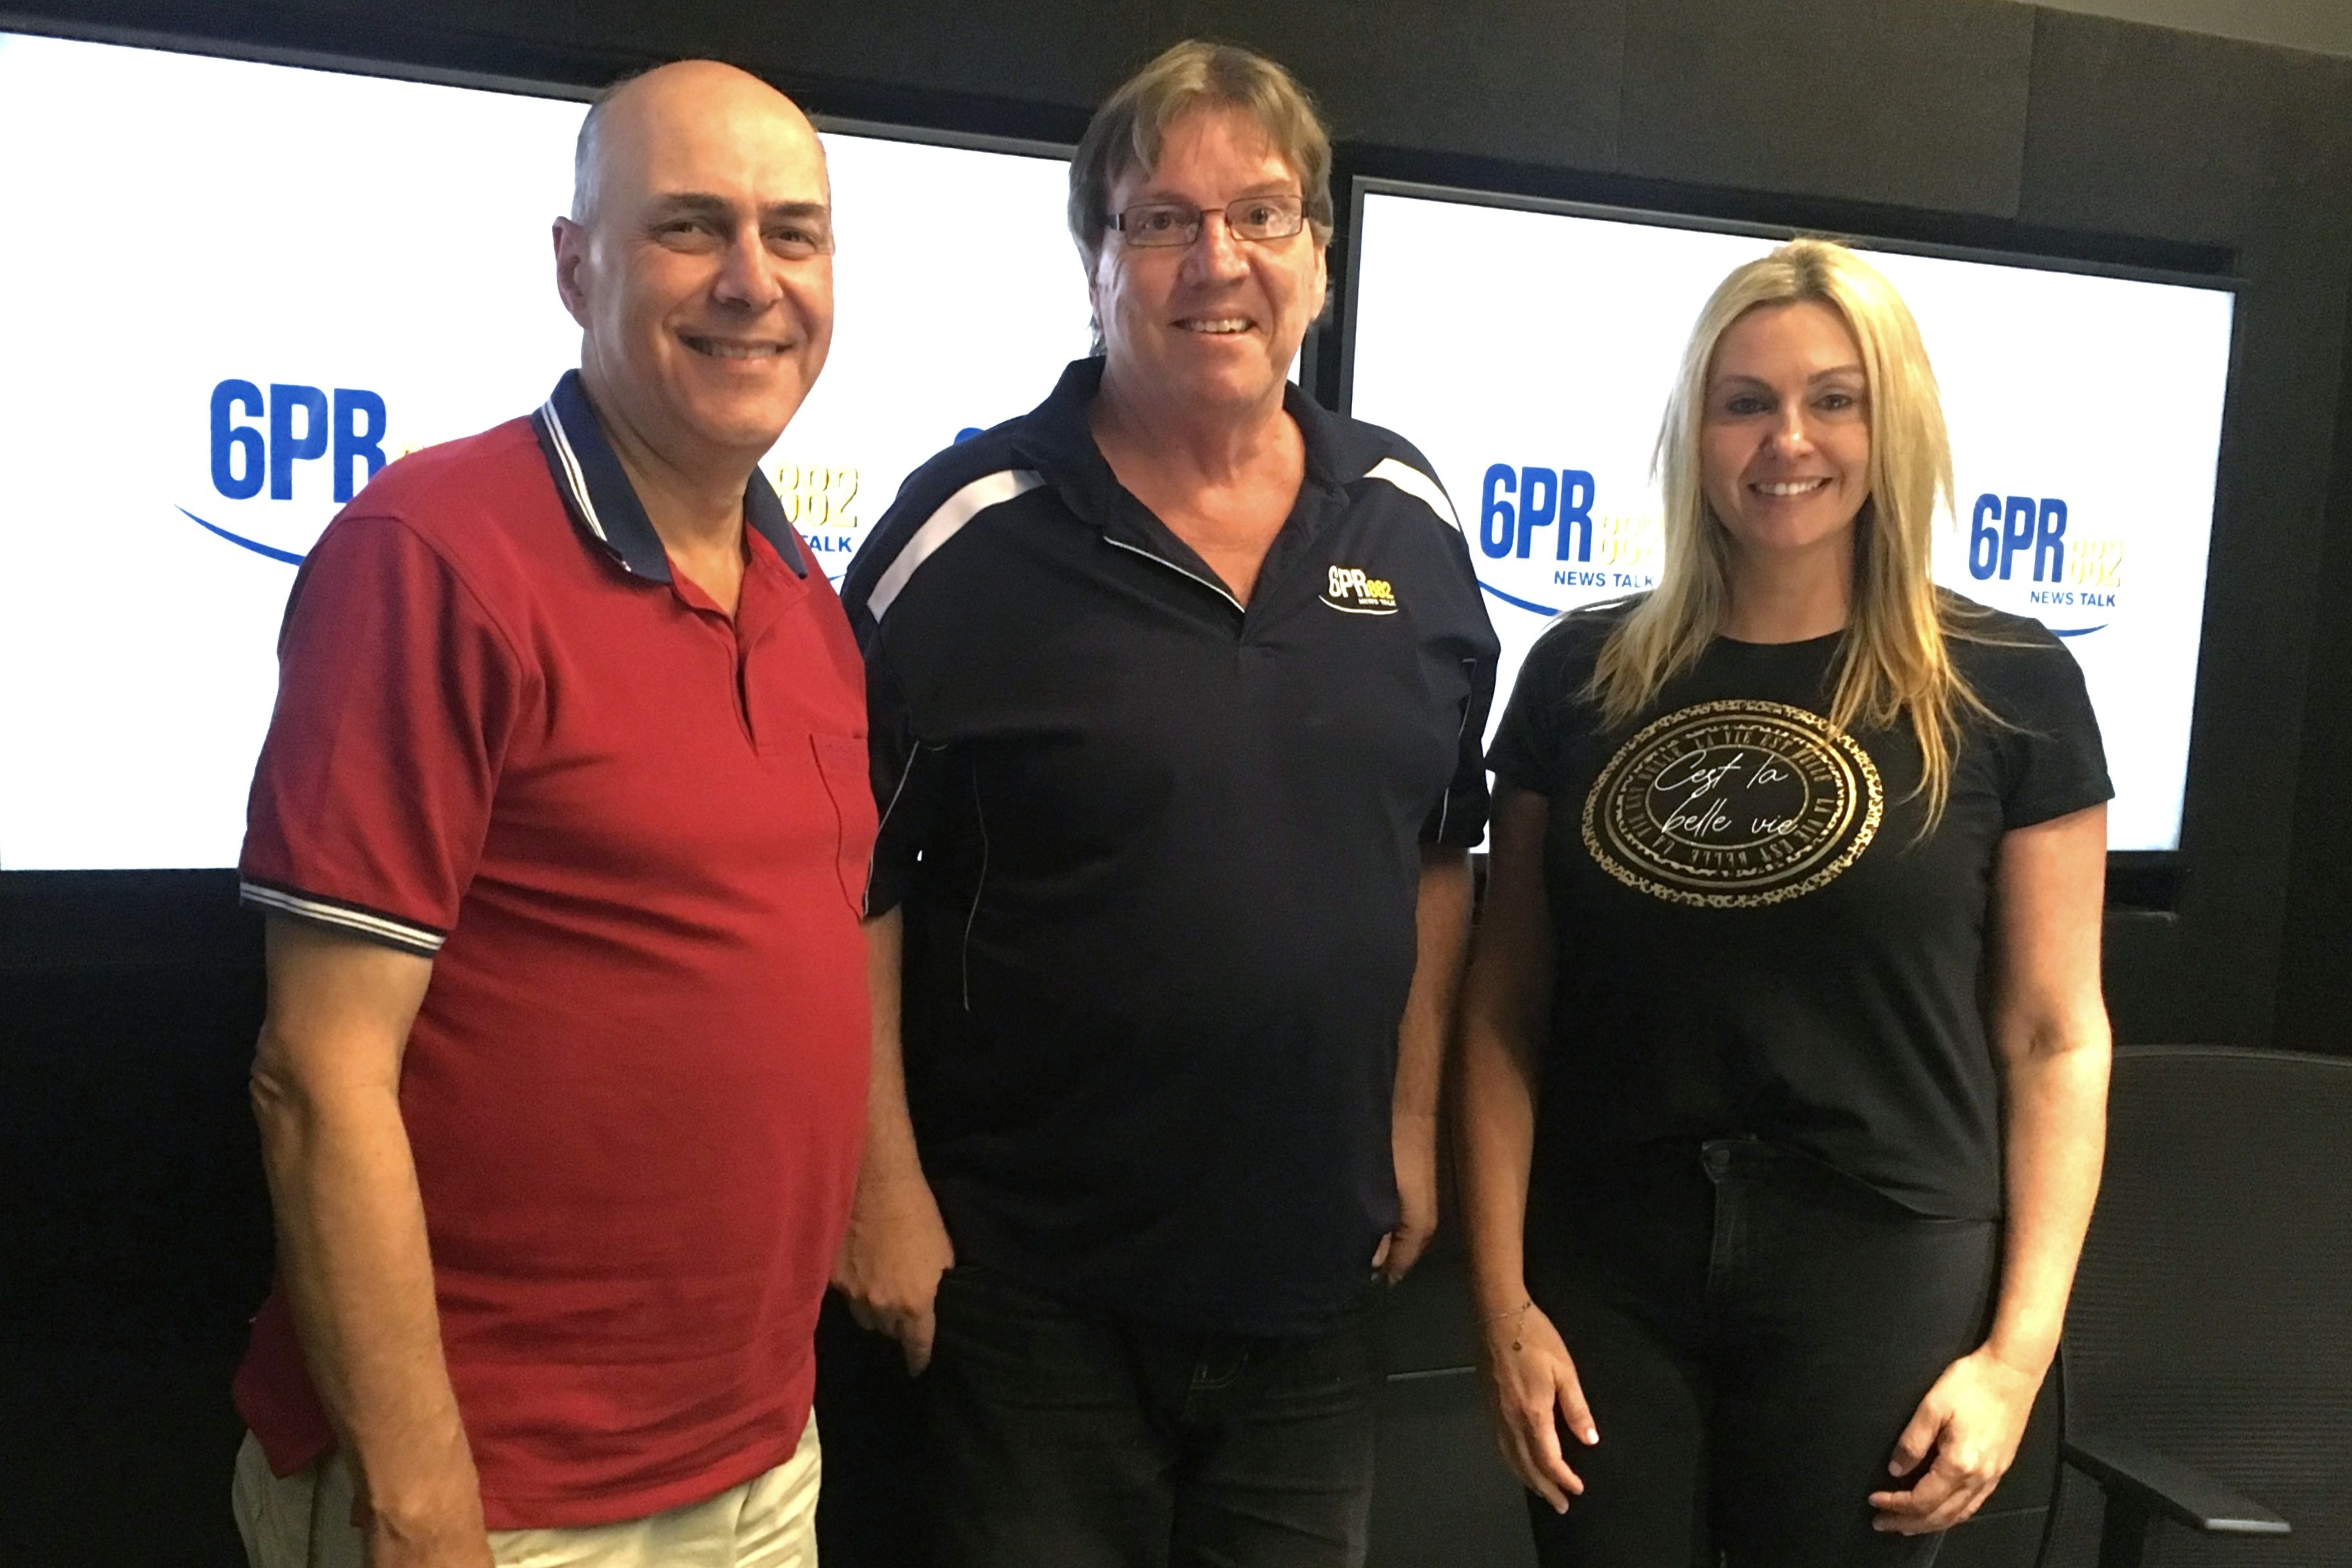 The Thursday Panel with Brooke Arnott and David Smith